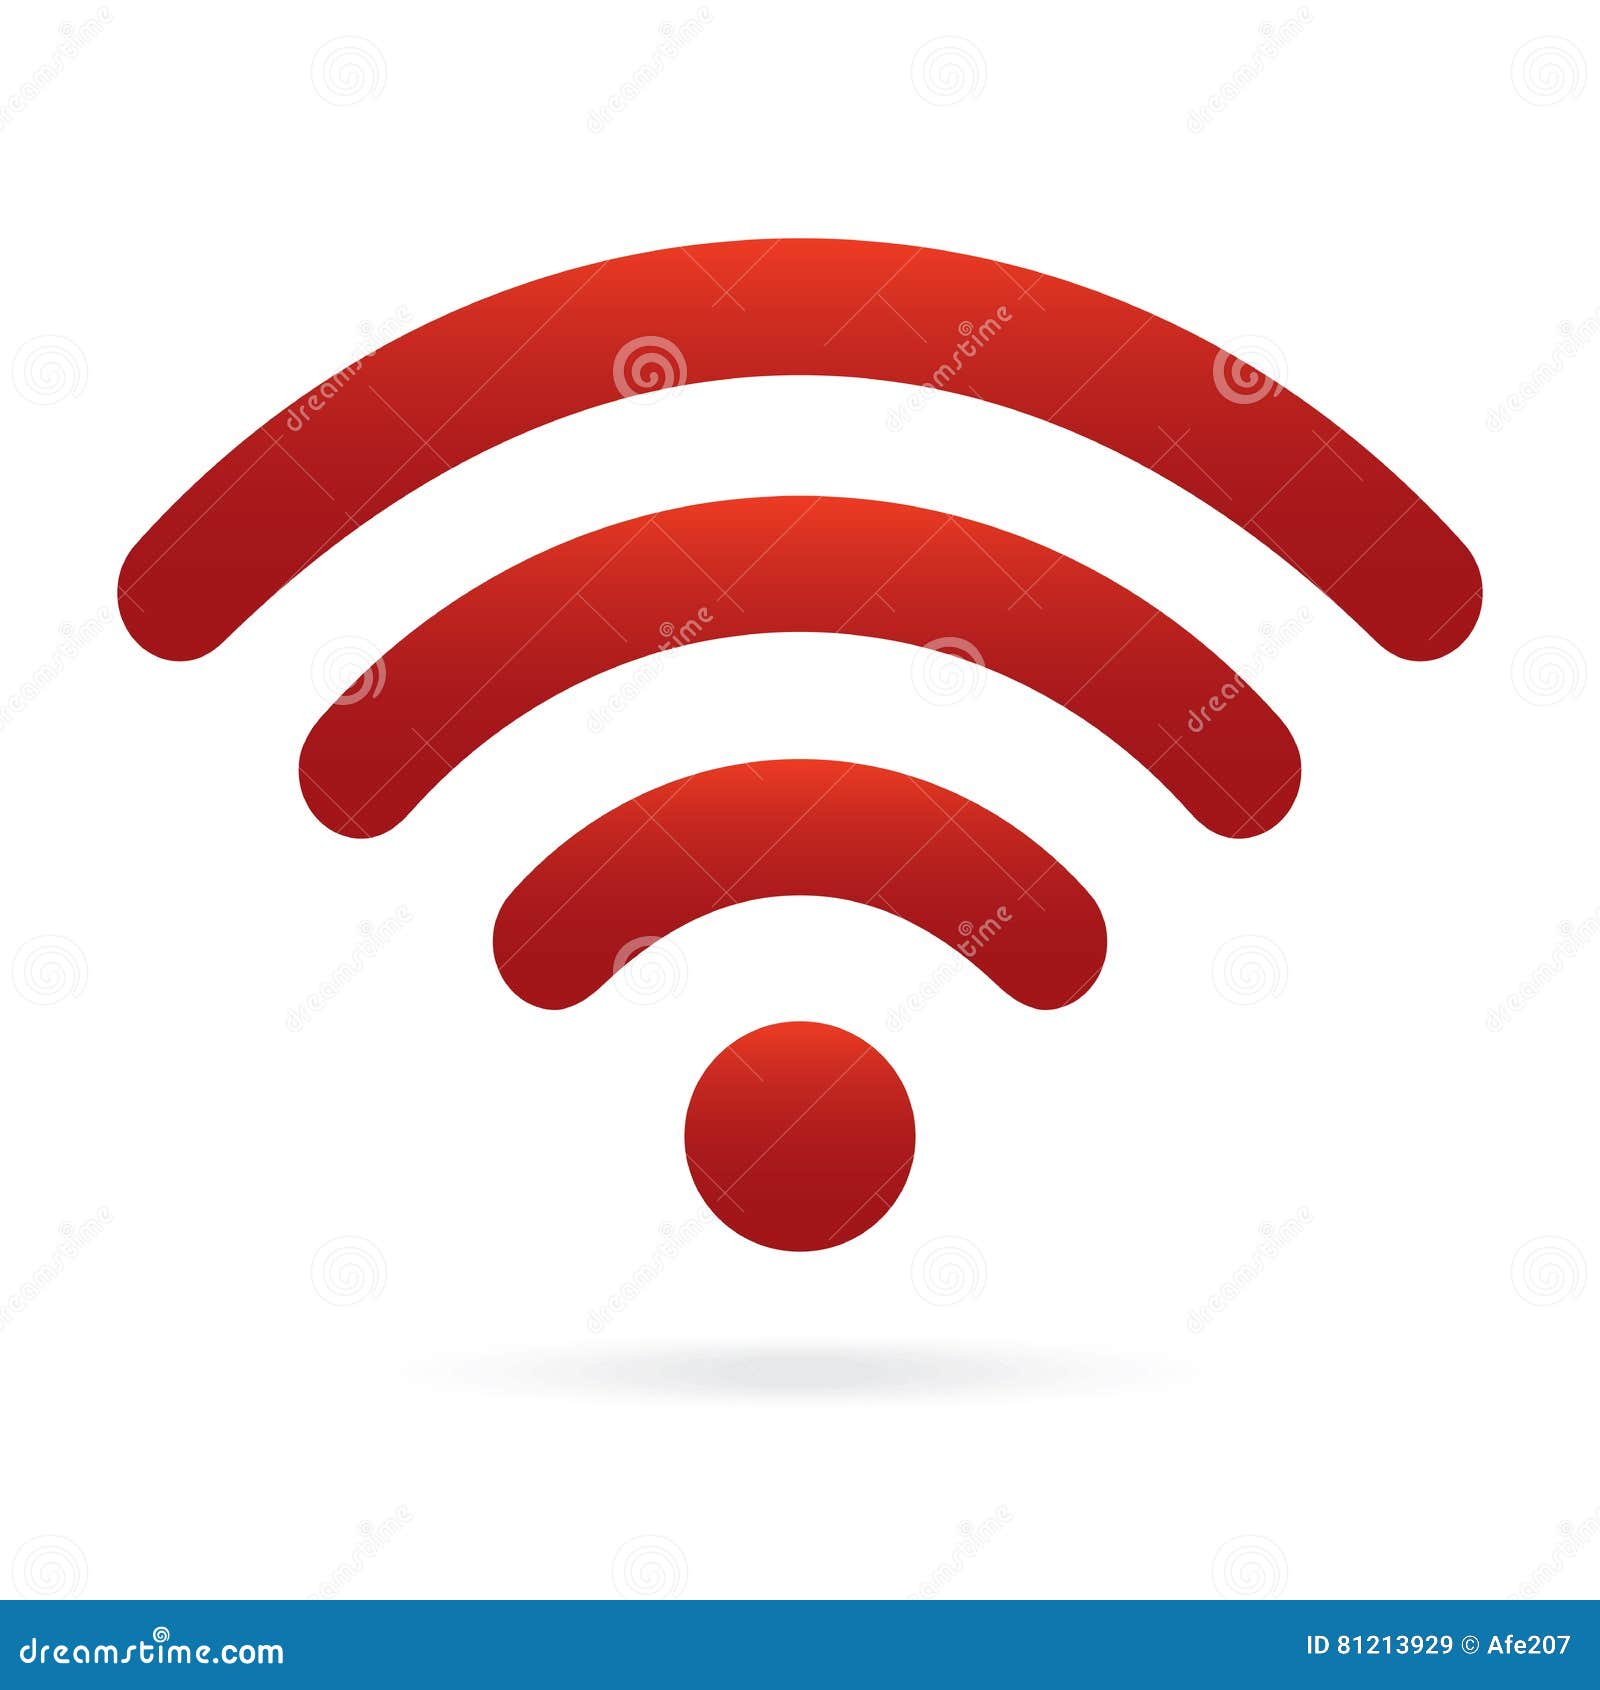 Red Wifi Icon Symbol on Isolated Background Stock Illustration - Illustration of technology, button: 81213929